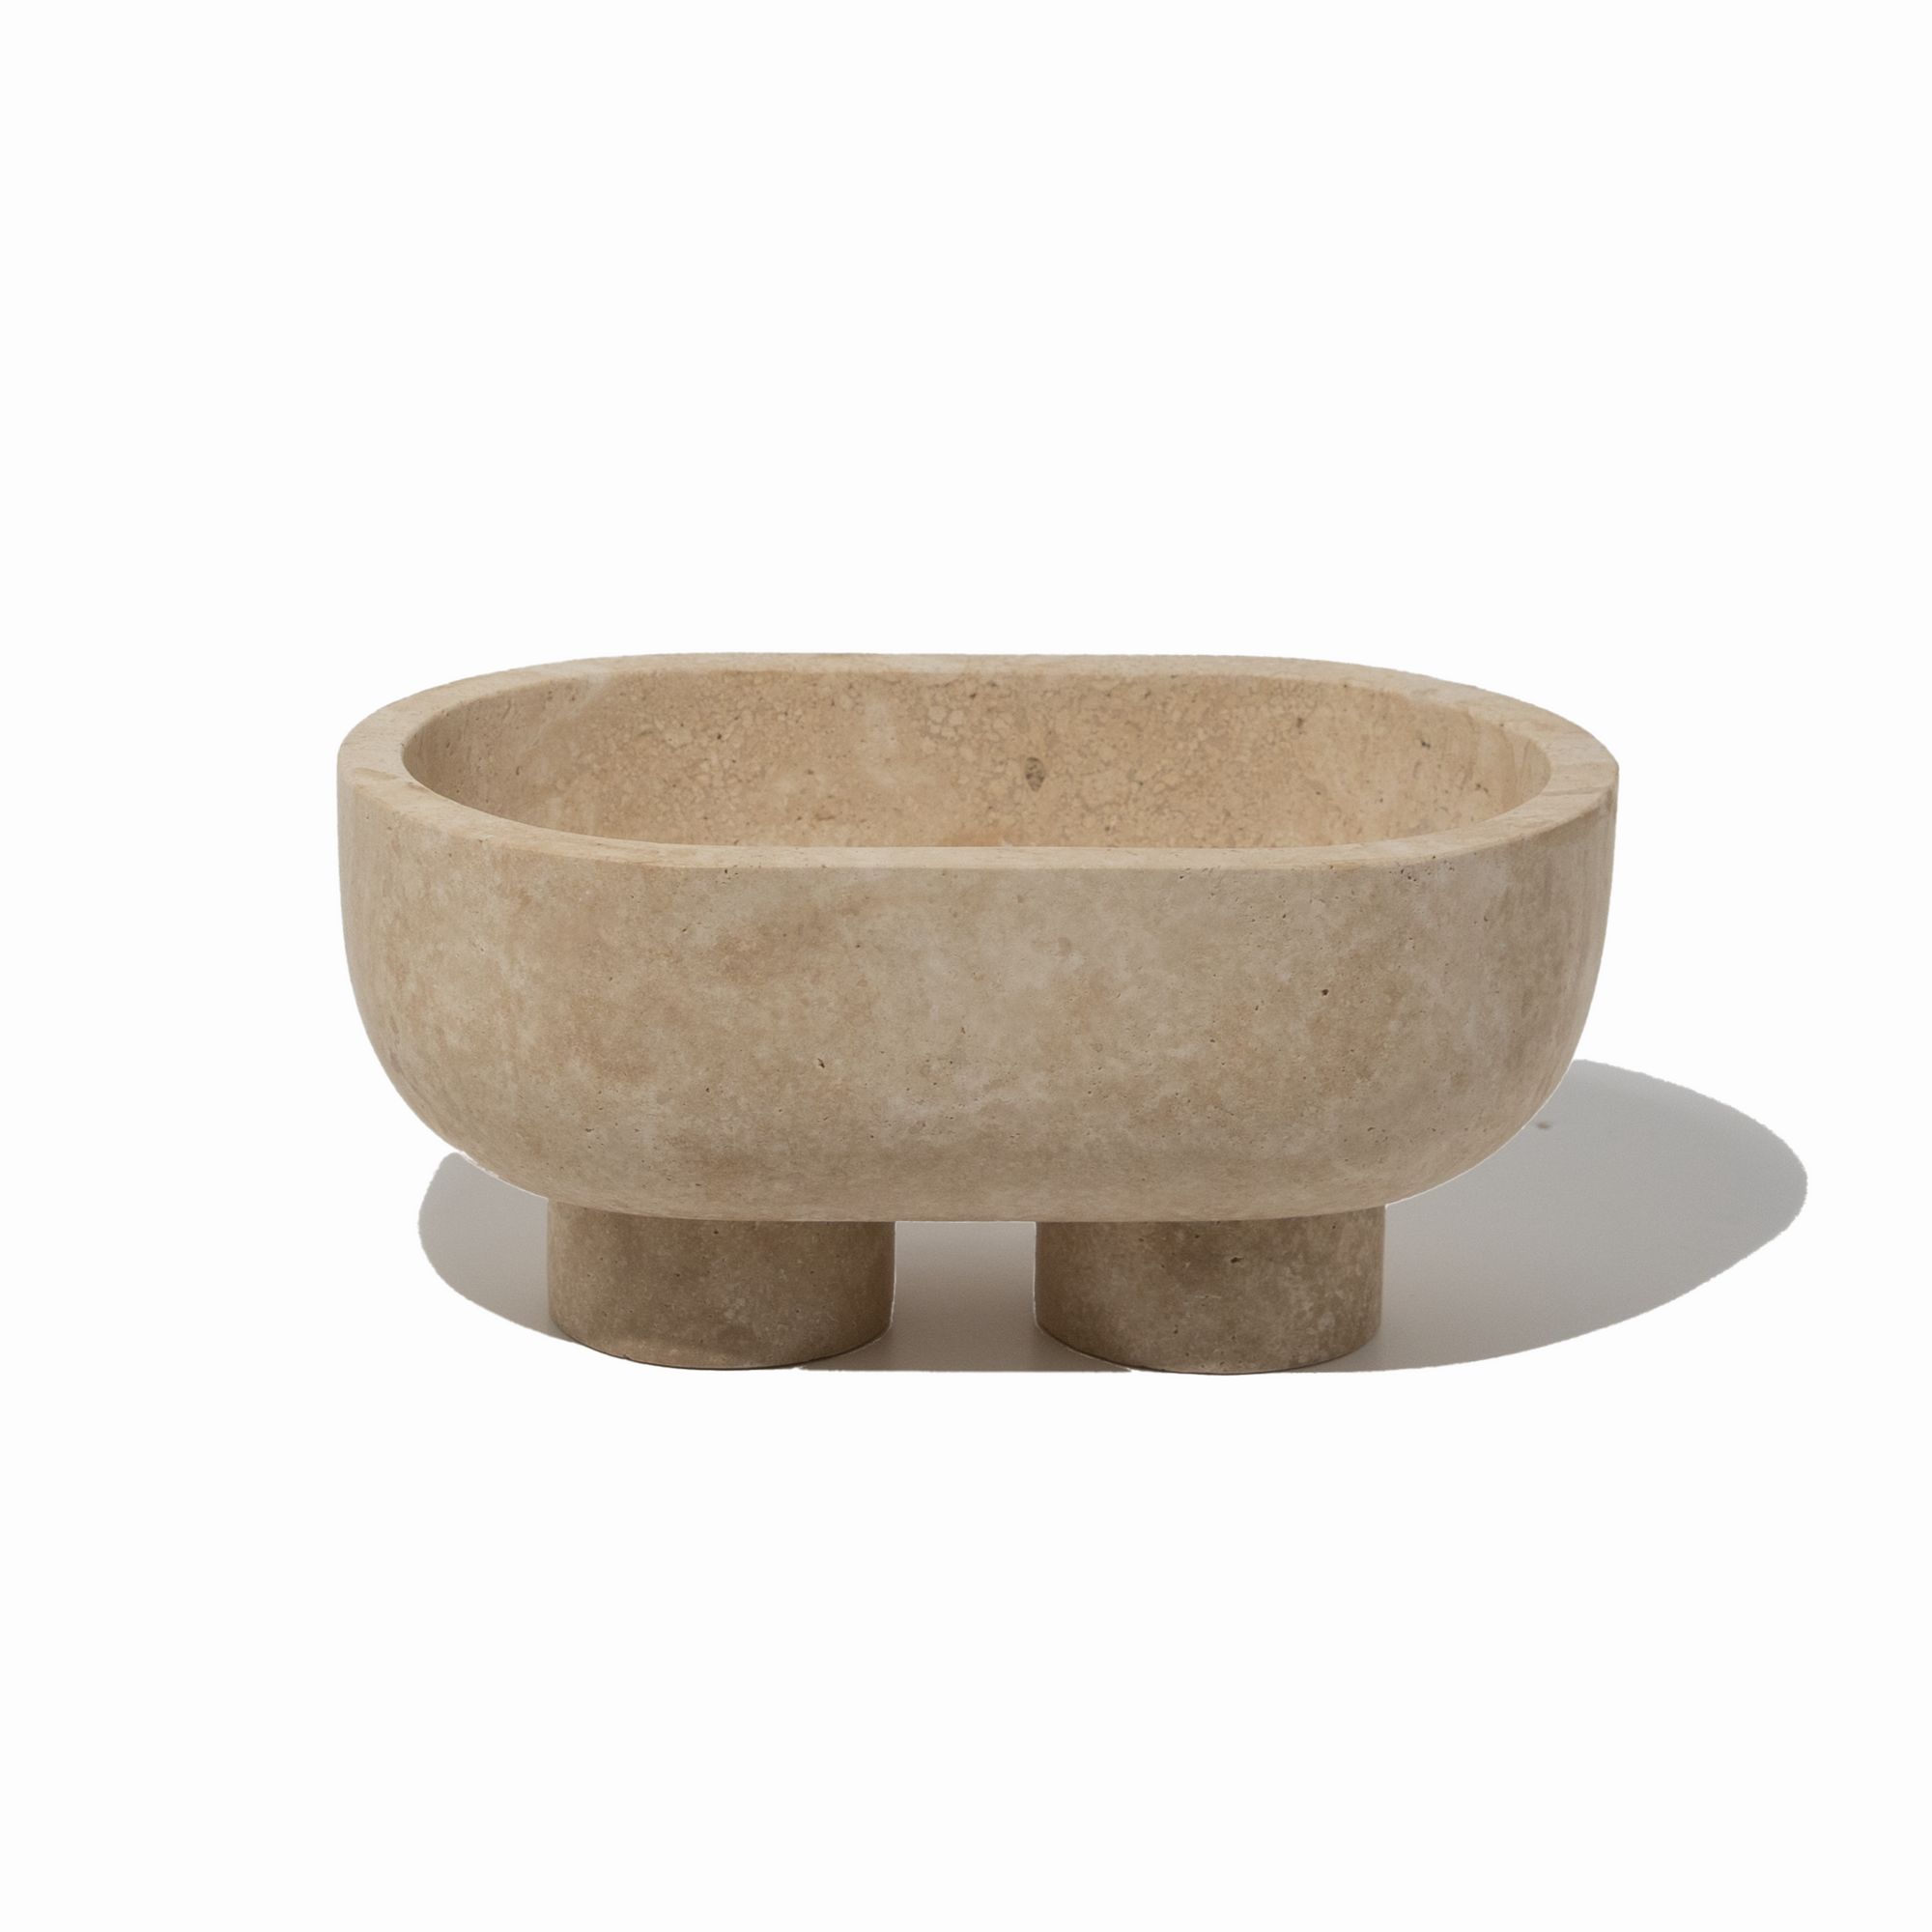 Muse Footed Oval Tray- Beige Travertine